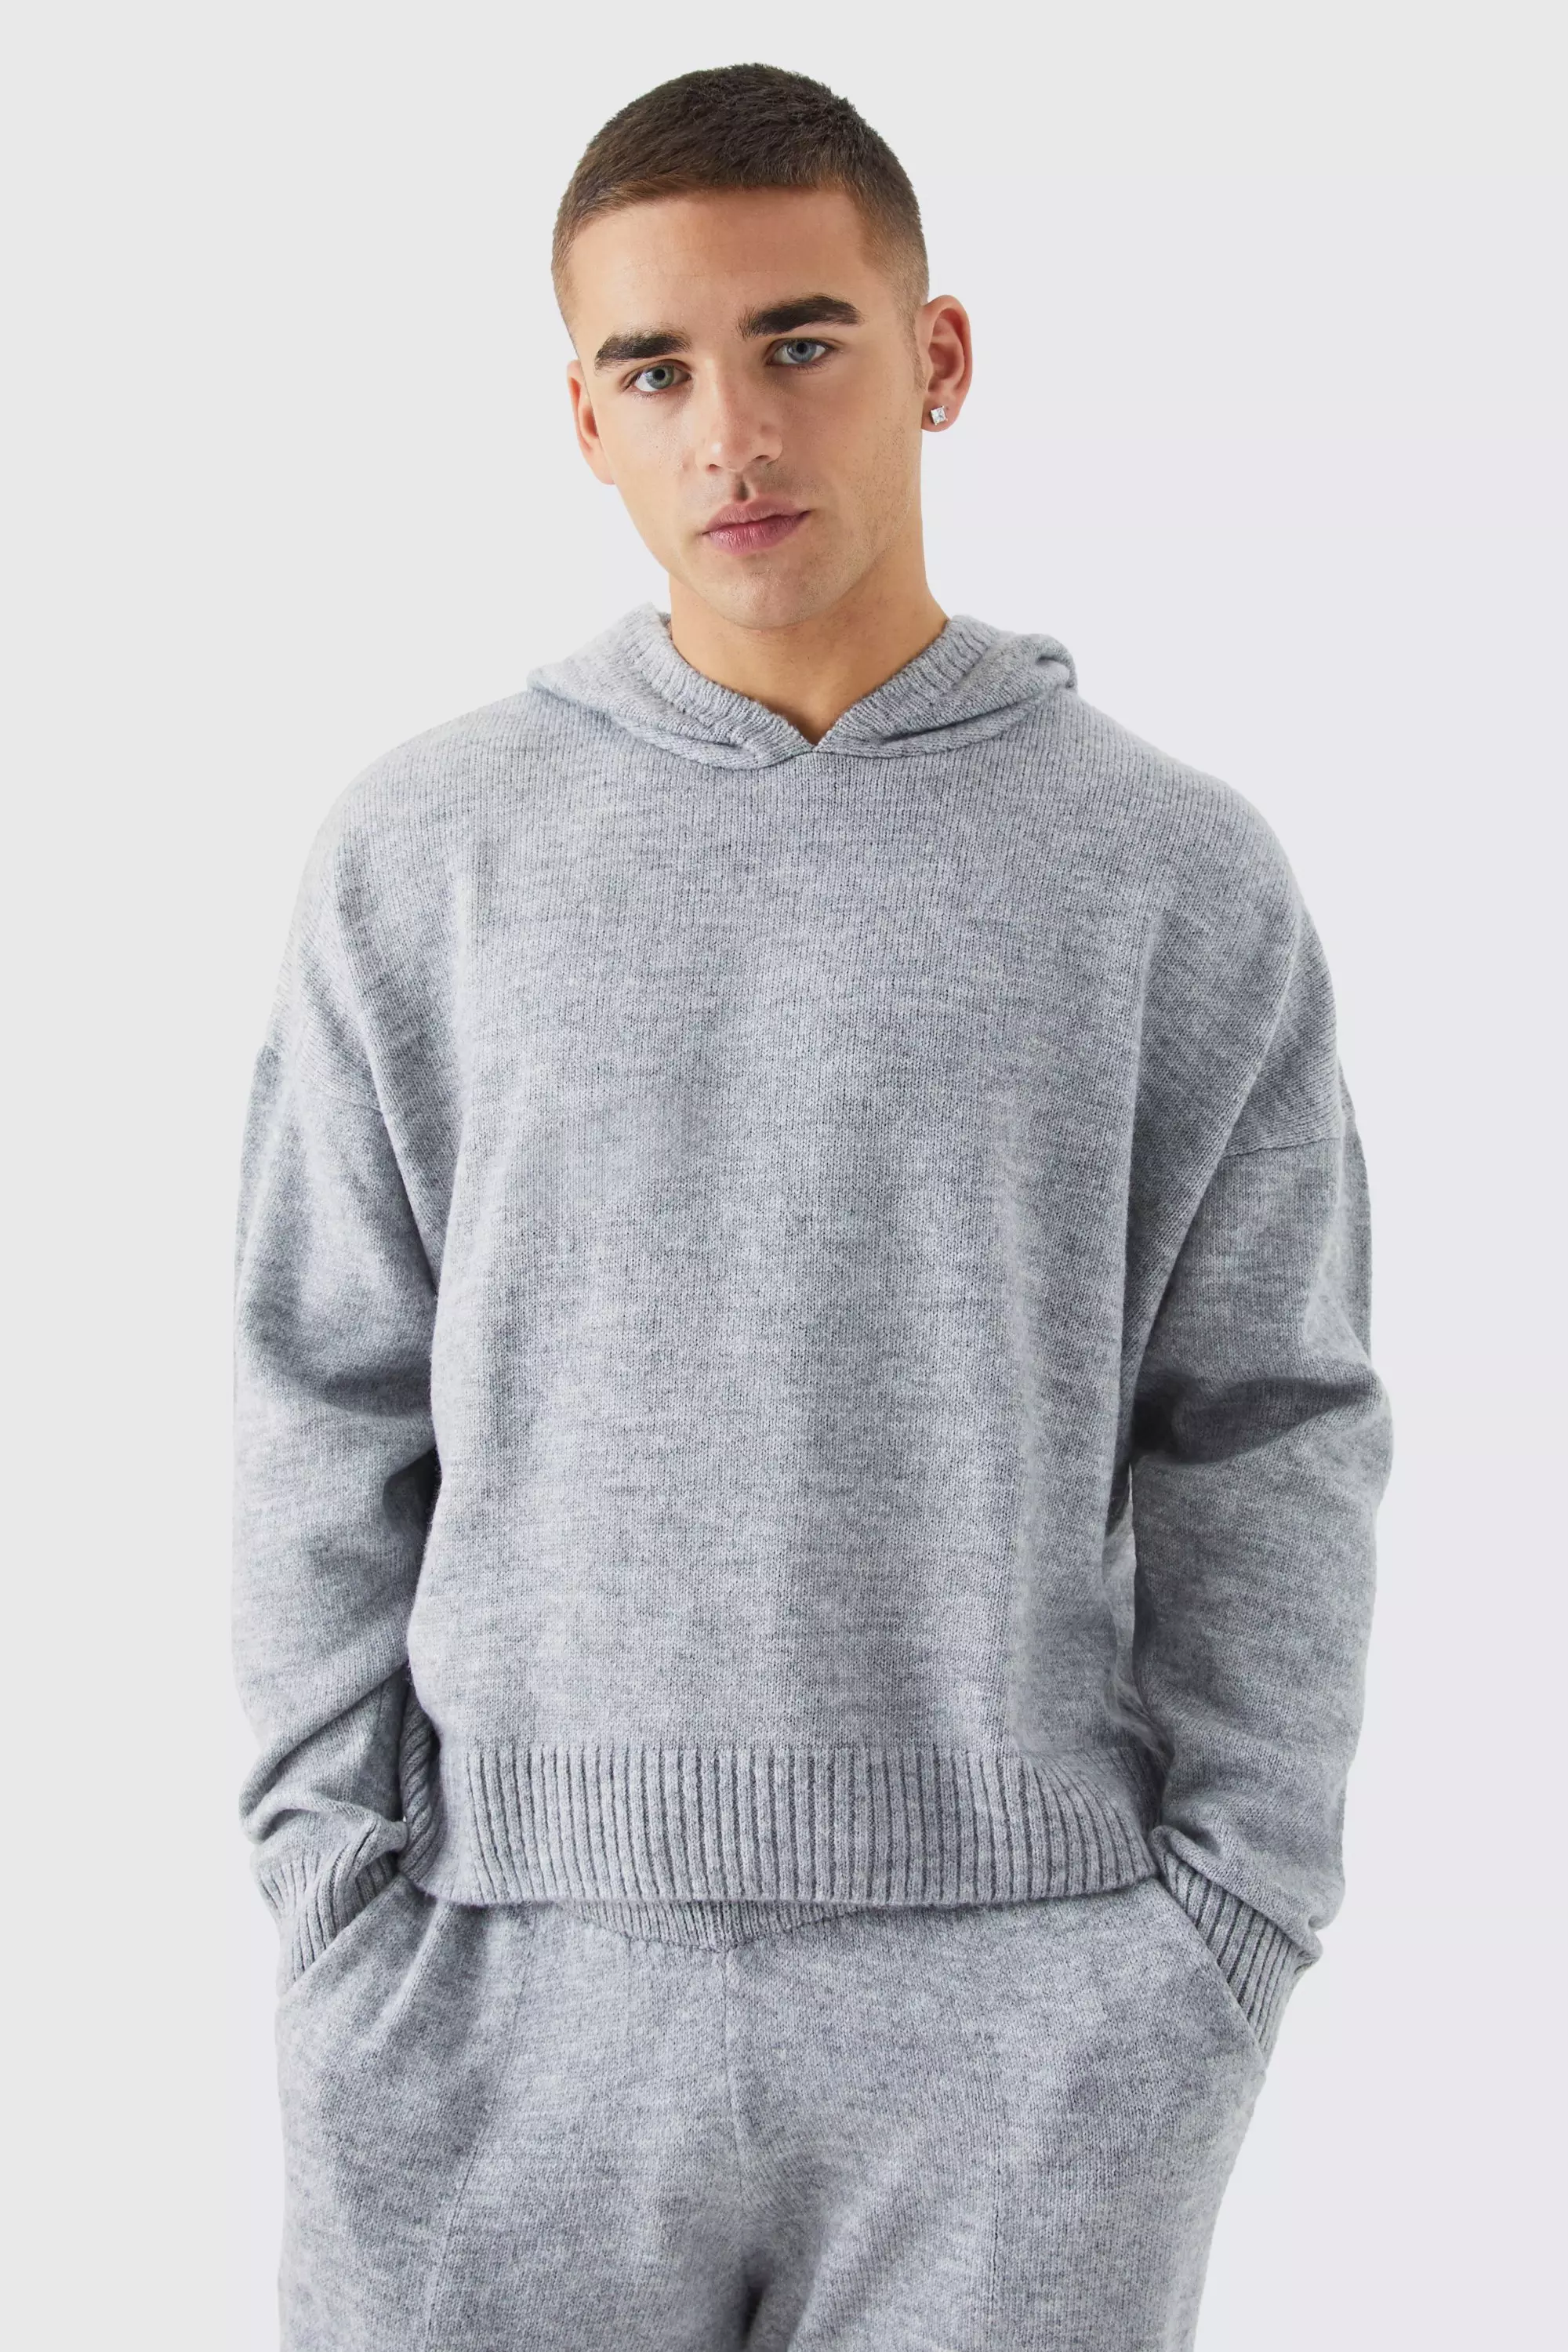 Boxy Brushed Knitted Hoodie Grey marl